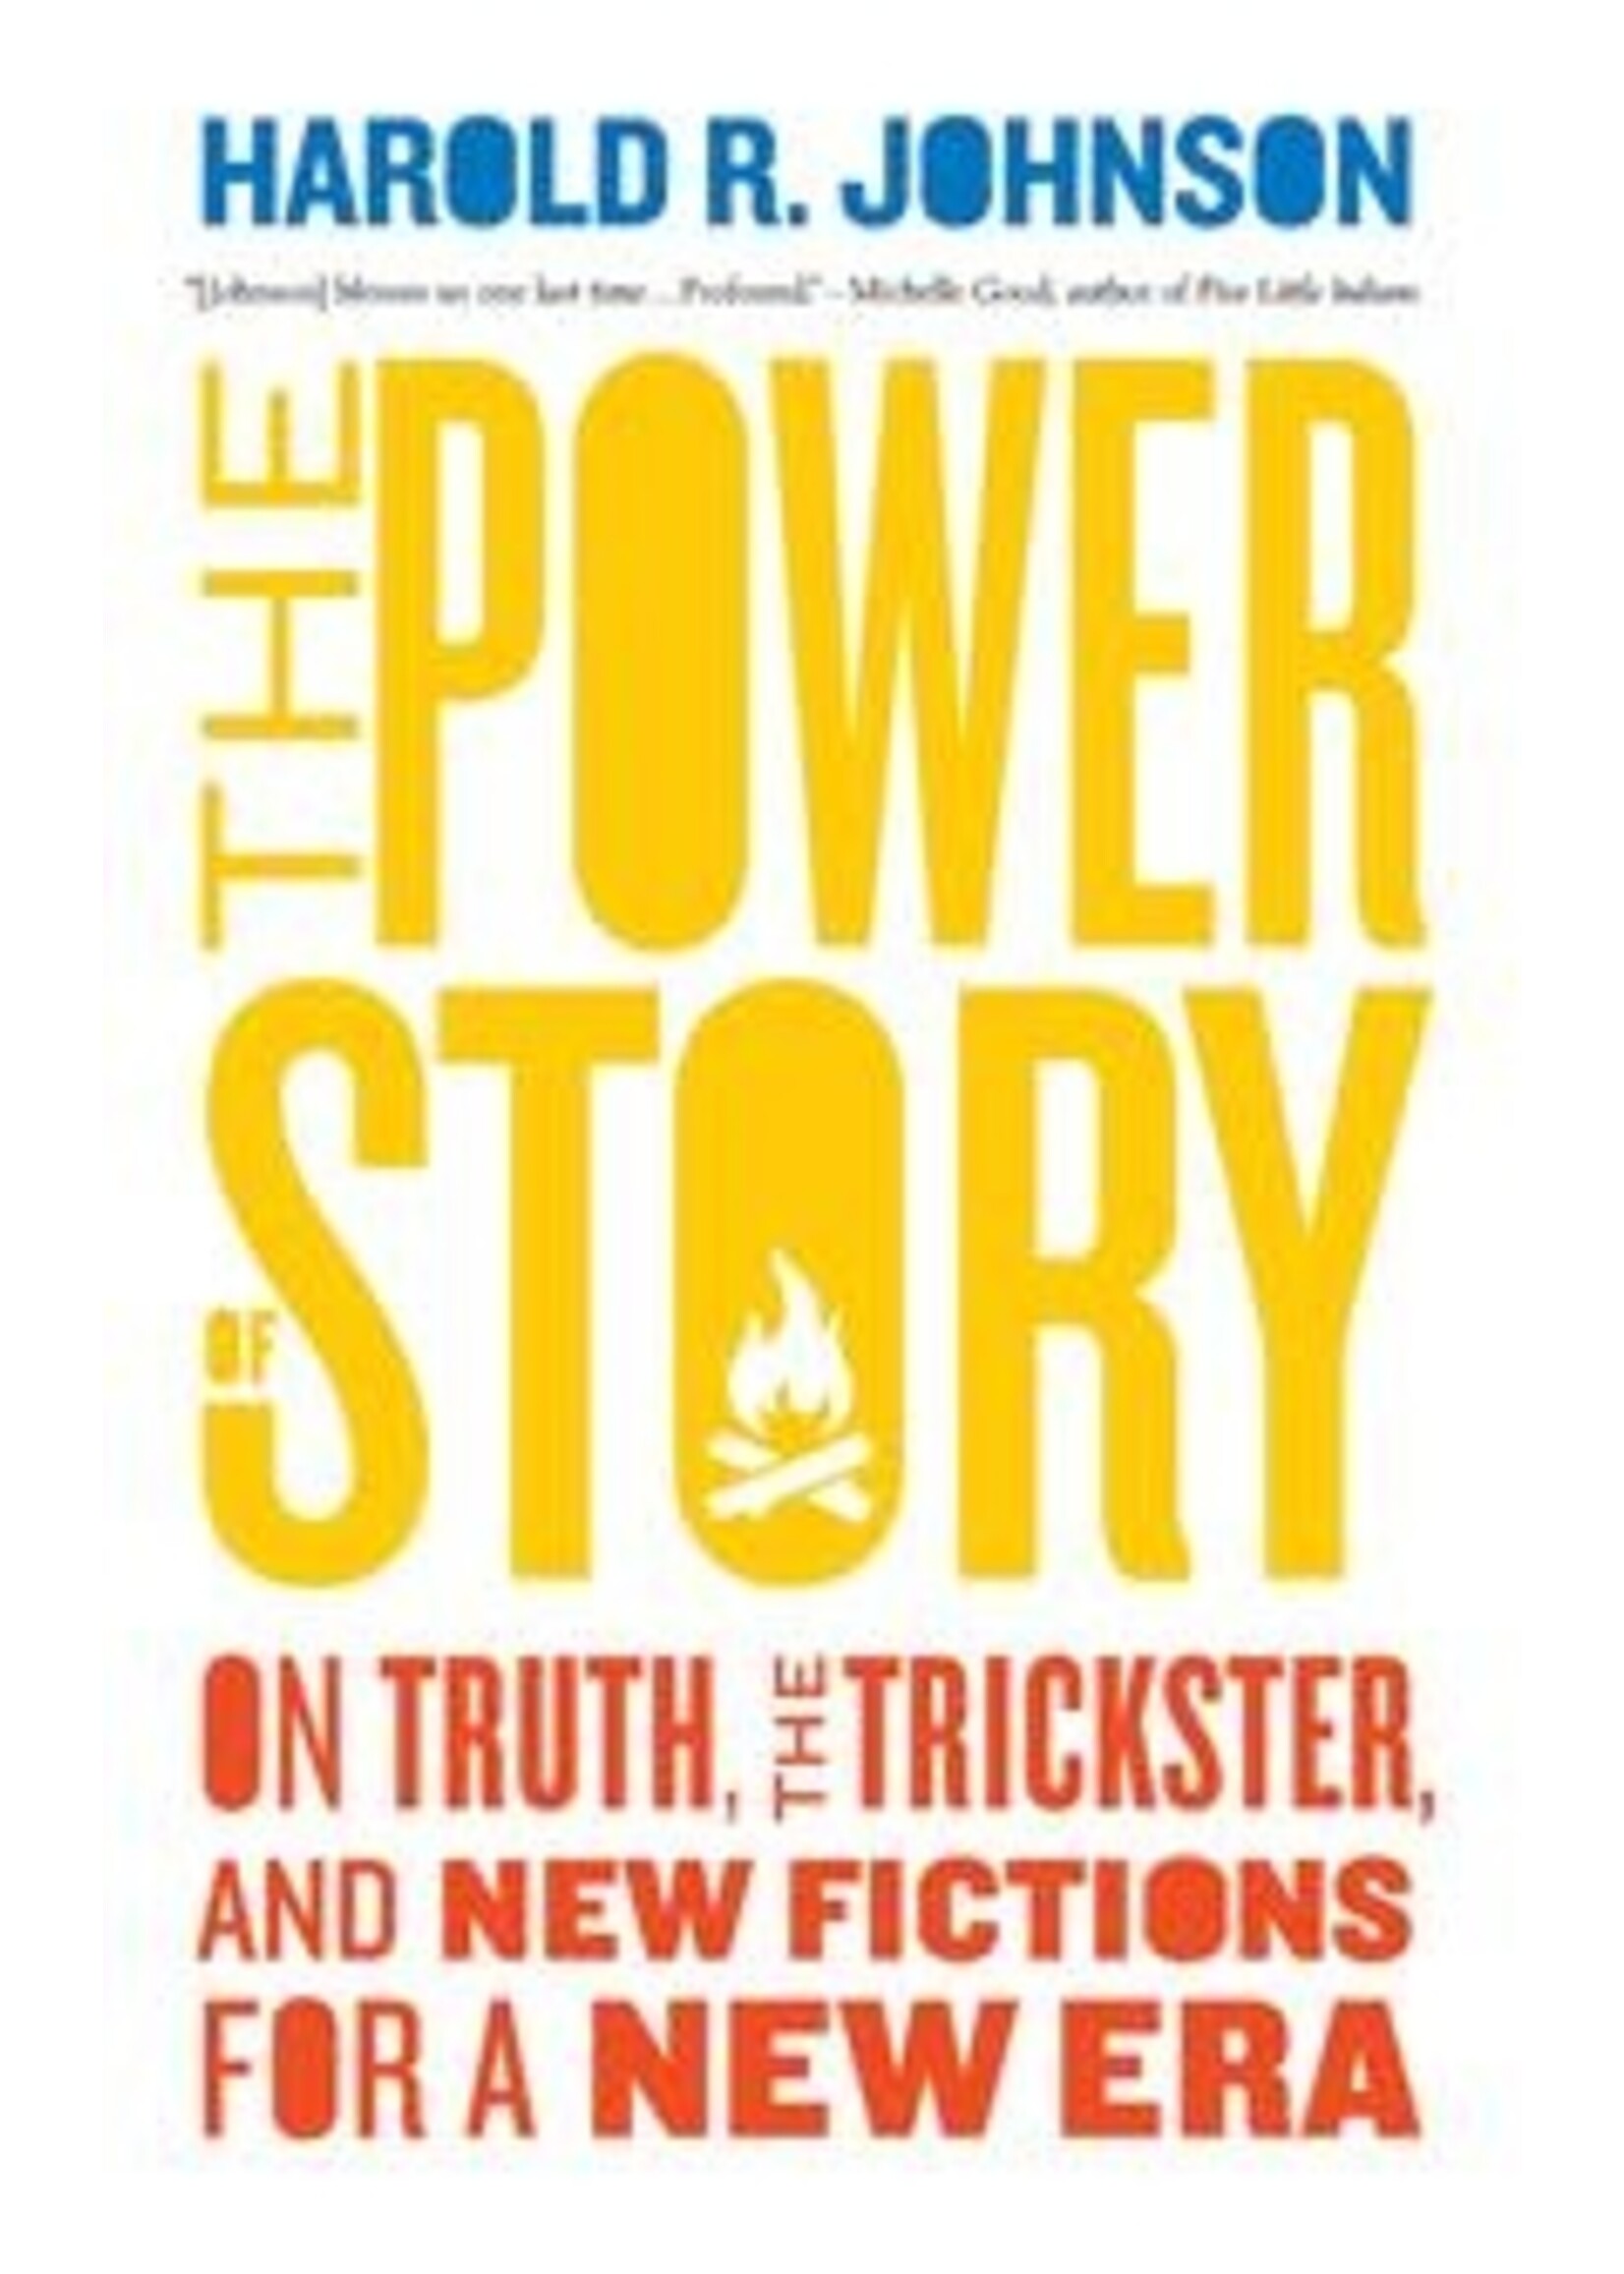 The Power of Story: On Truth, the Trickster, and New Fictions for a New Era by Harold R. Johnson